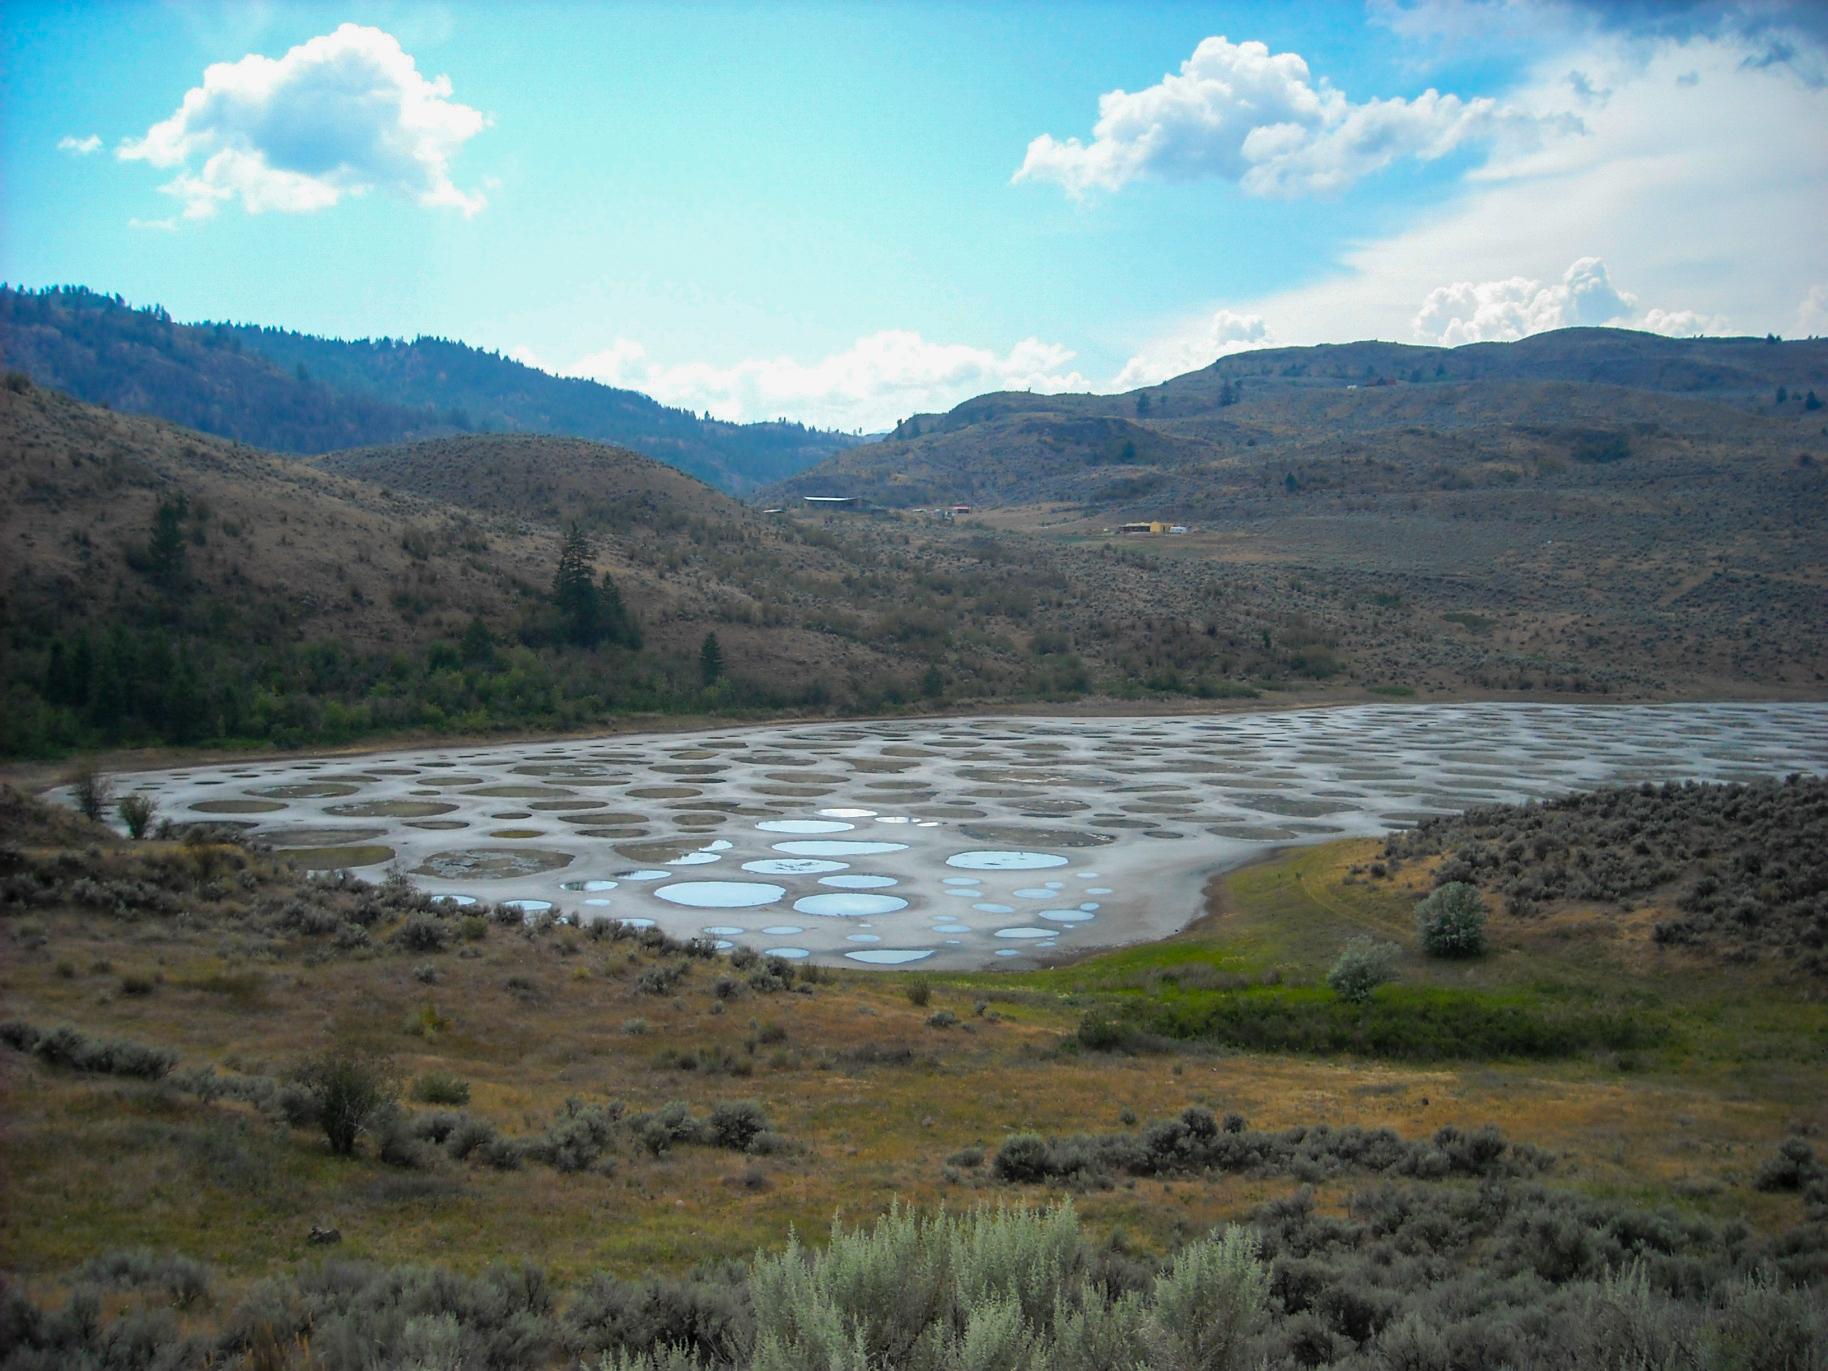 Spotted Lake from the shoulder of Highway 3. It is a saline endorheic alkali lake located northwest of Osoyoos in the eastern Similkameen Valley of British Columbia, Canada.